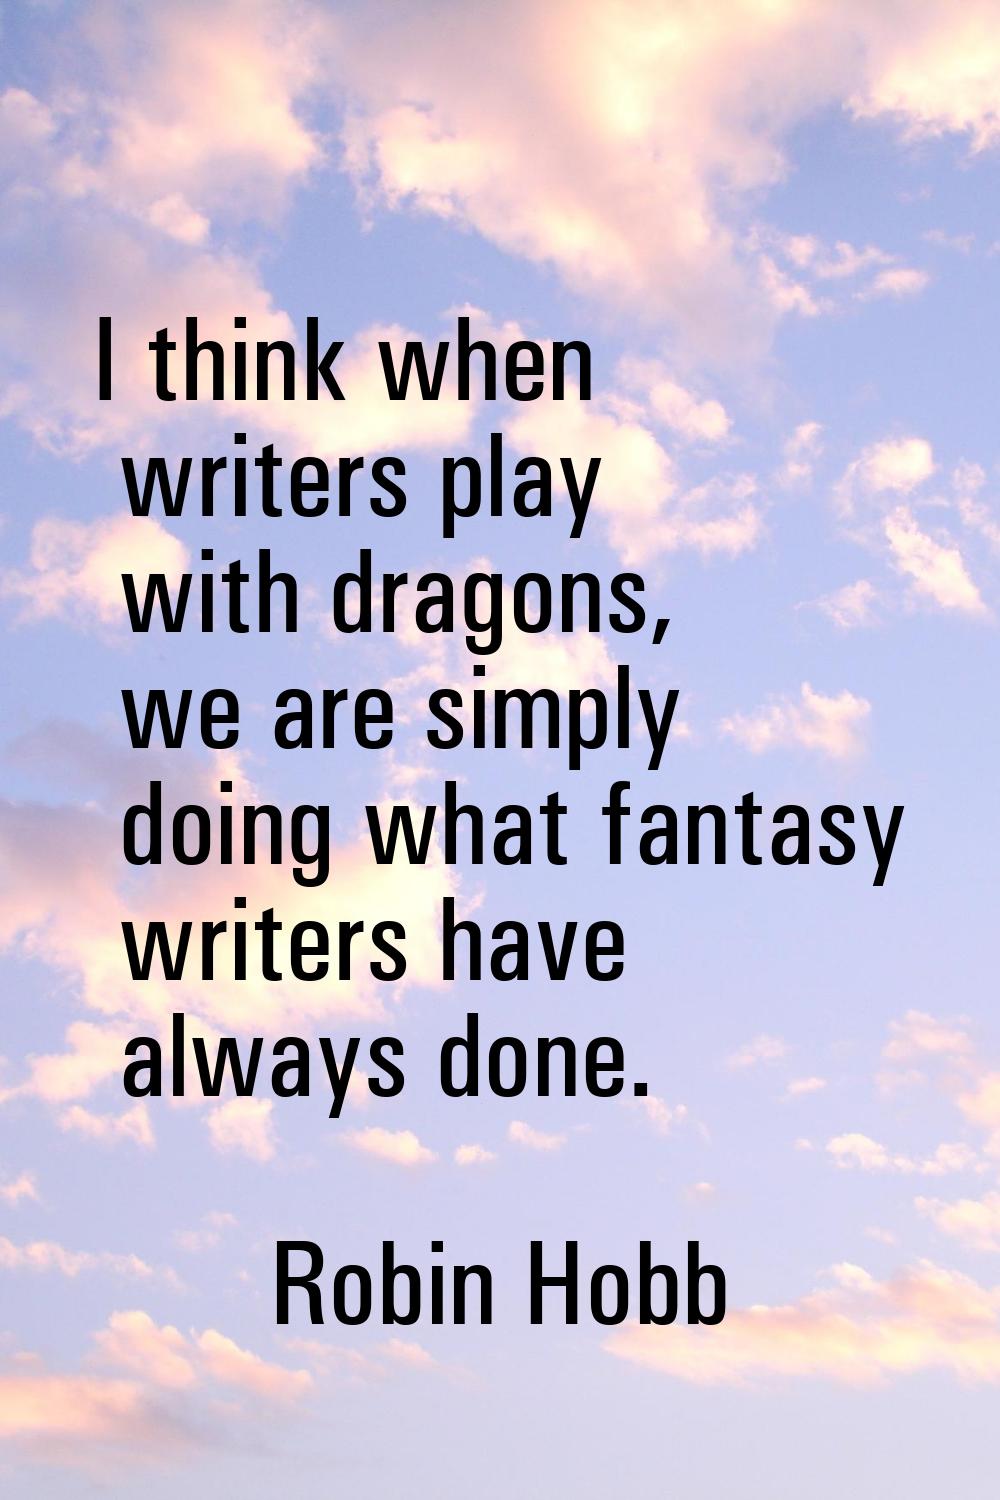 I think when writers play with dragons, we are simply doing what fantasy writers have always done.